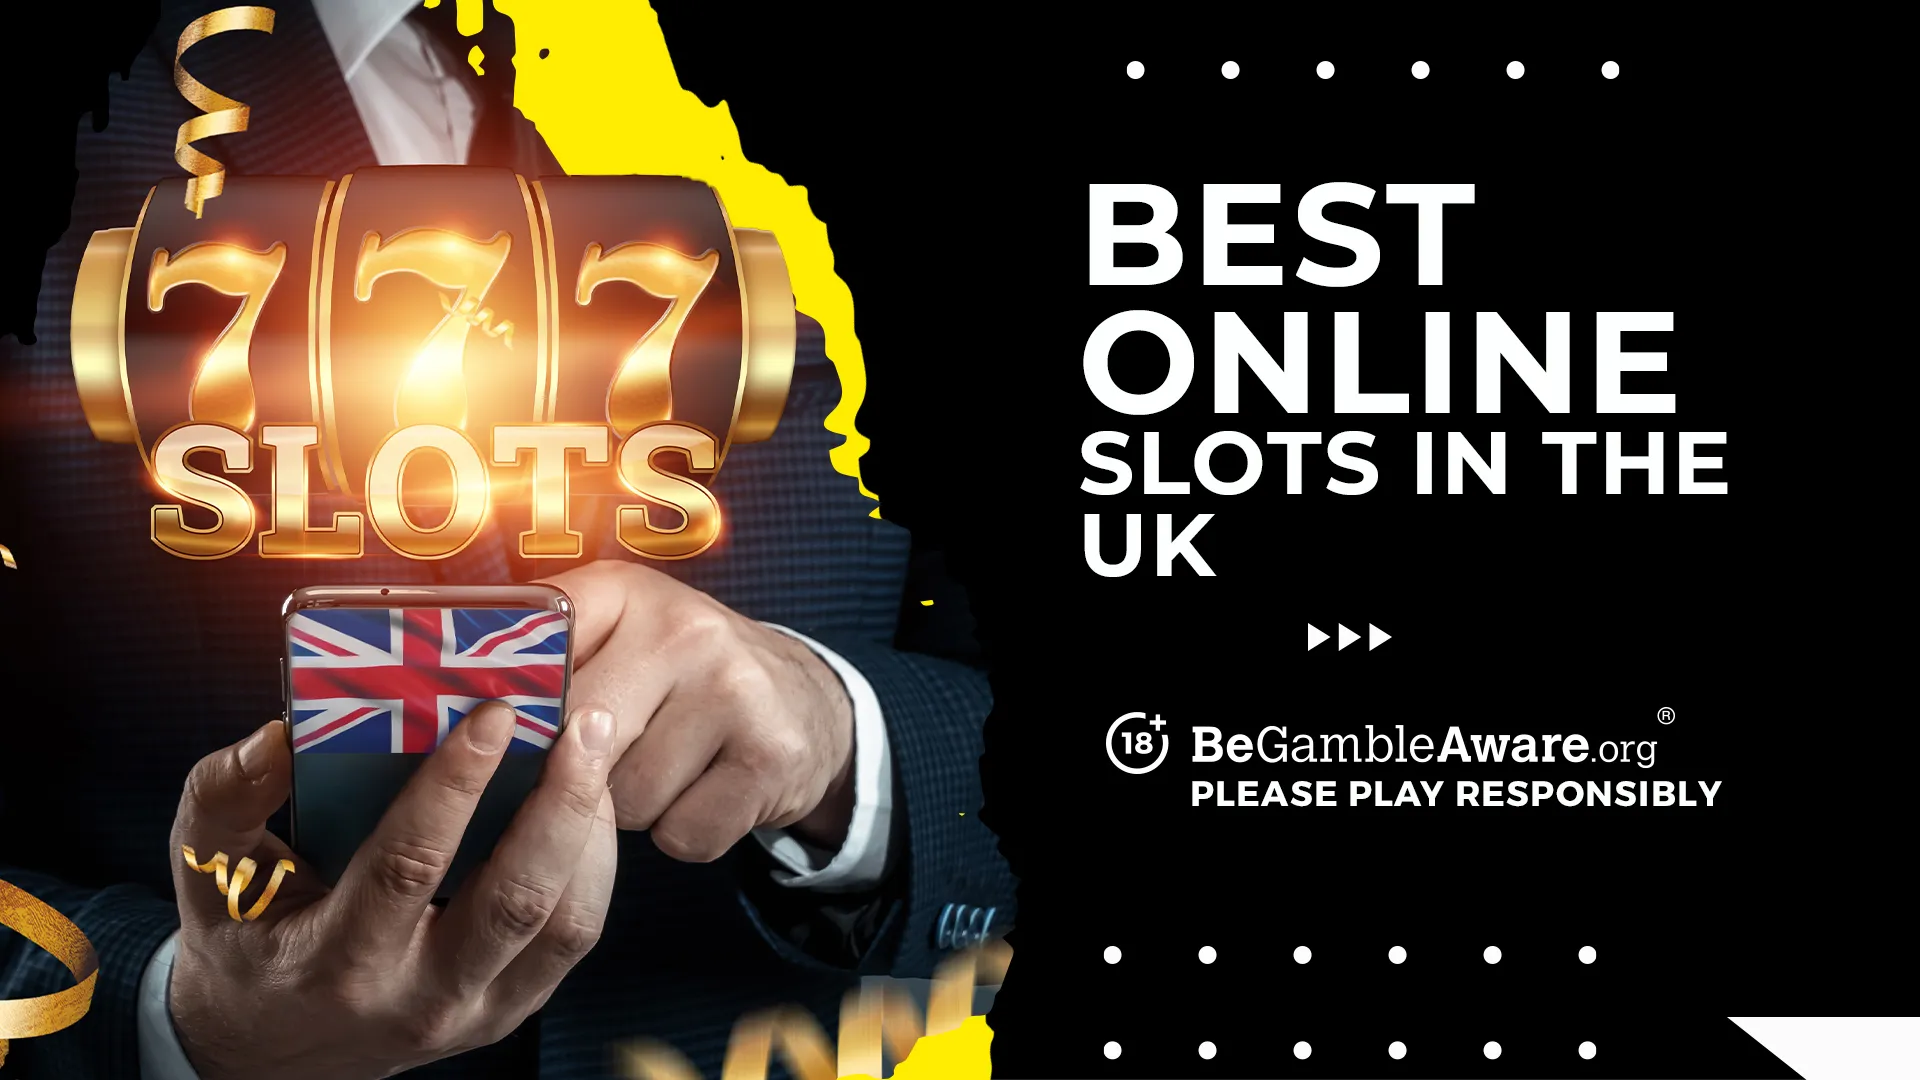 Best online slots - Play top-rated slot games at UK casinos